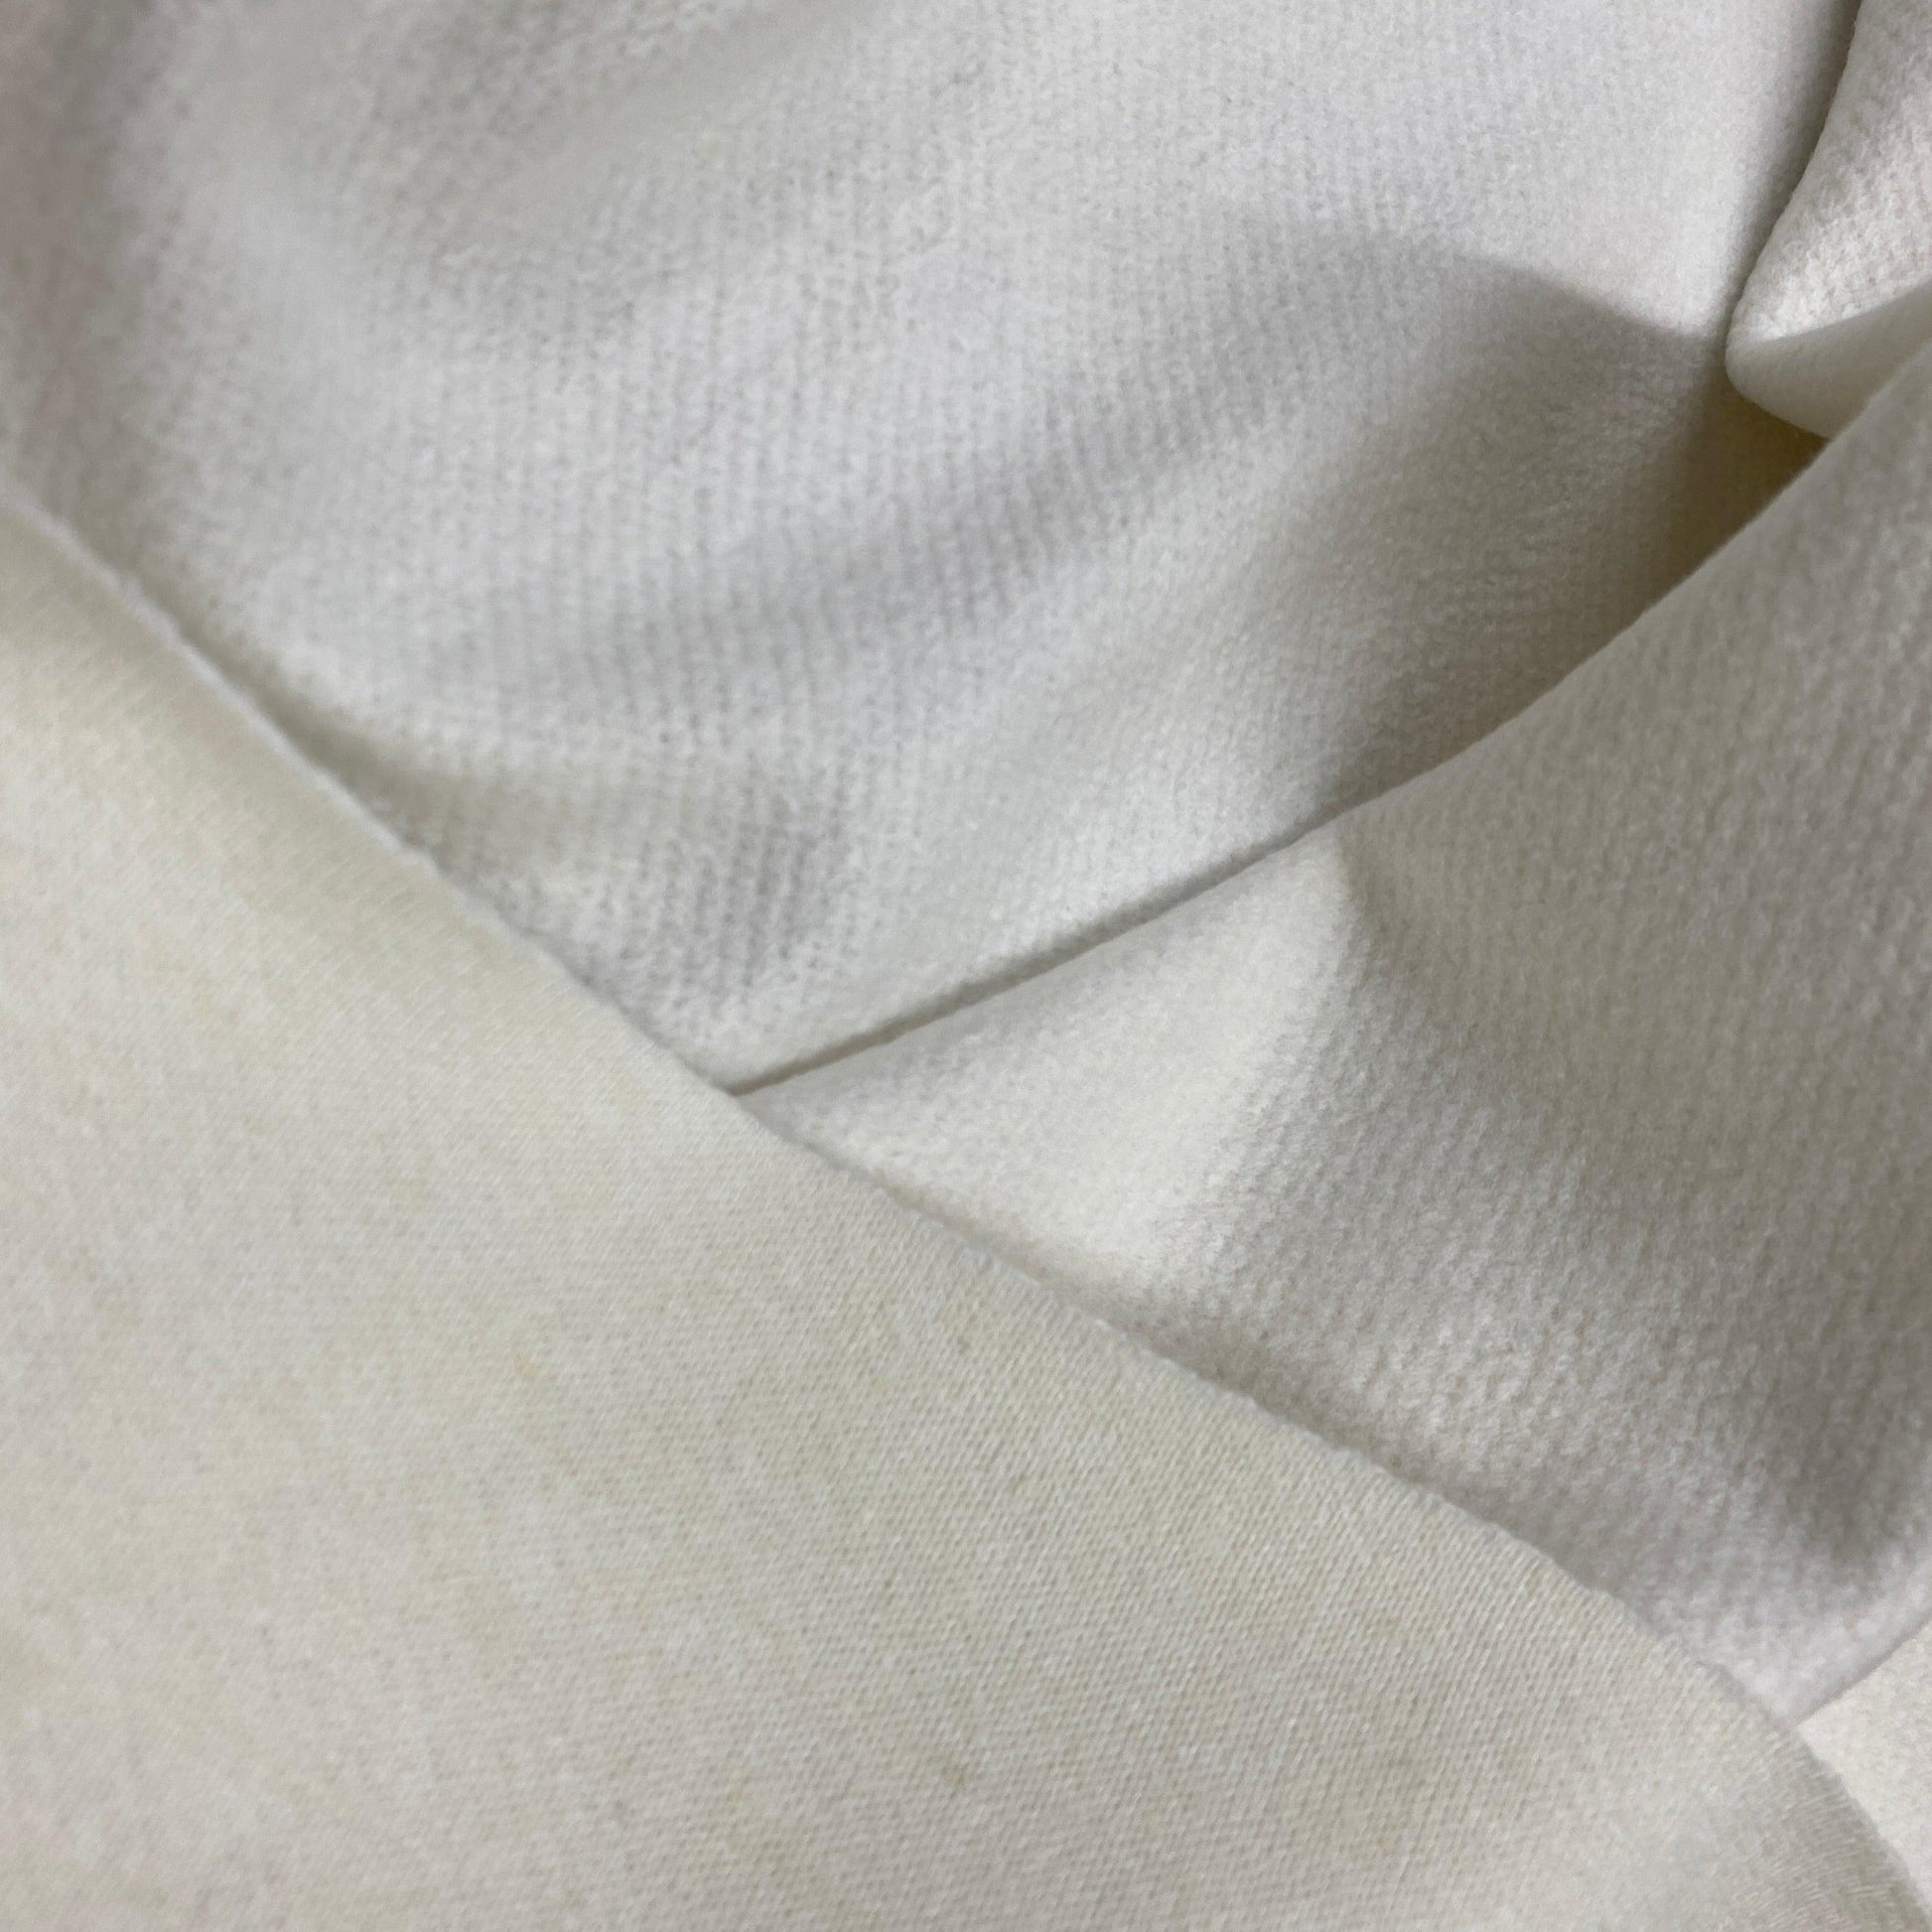 Hemp Jersey Fabric by the Yard or Wholesale